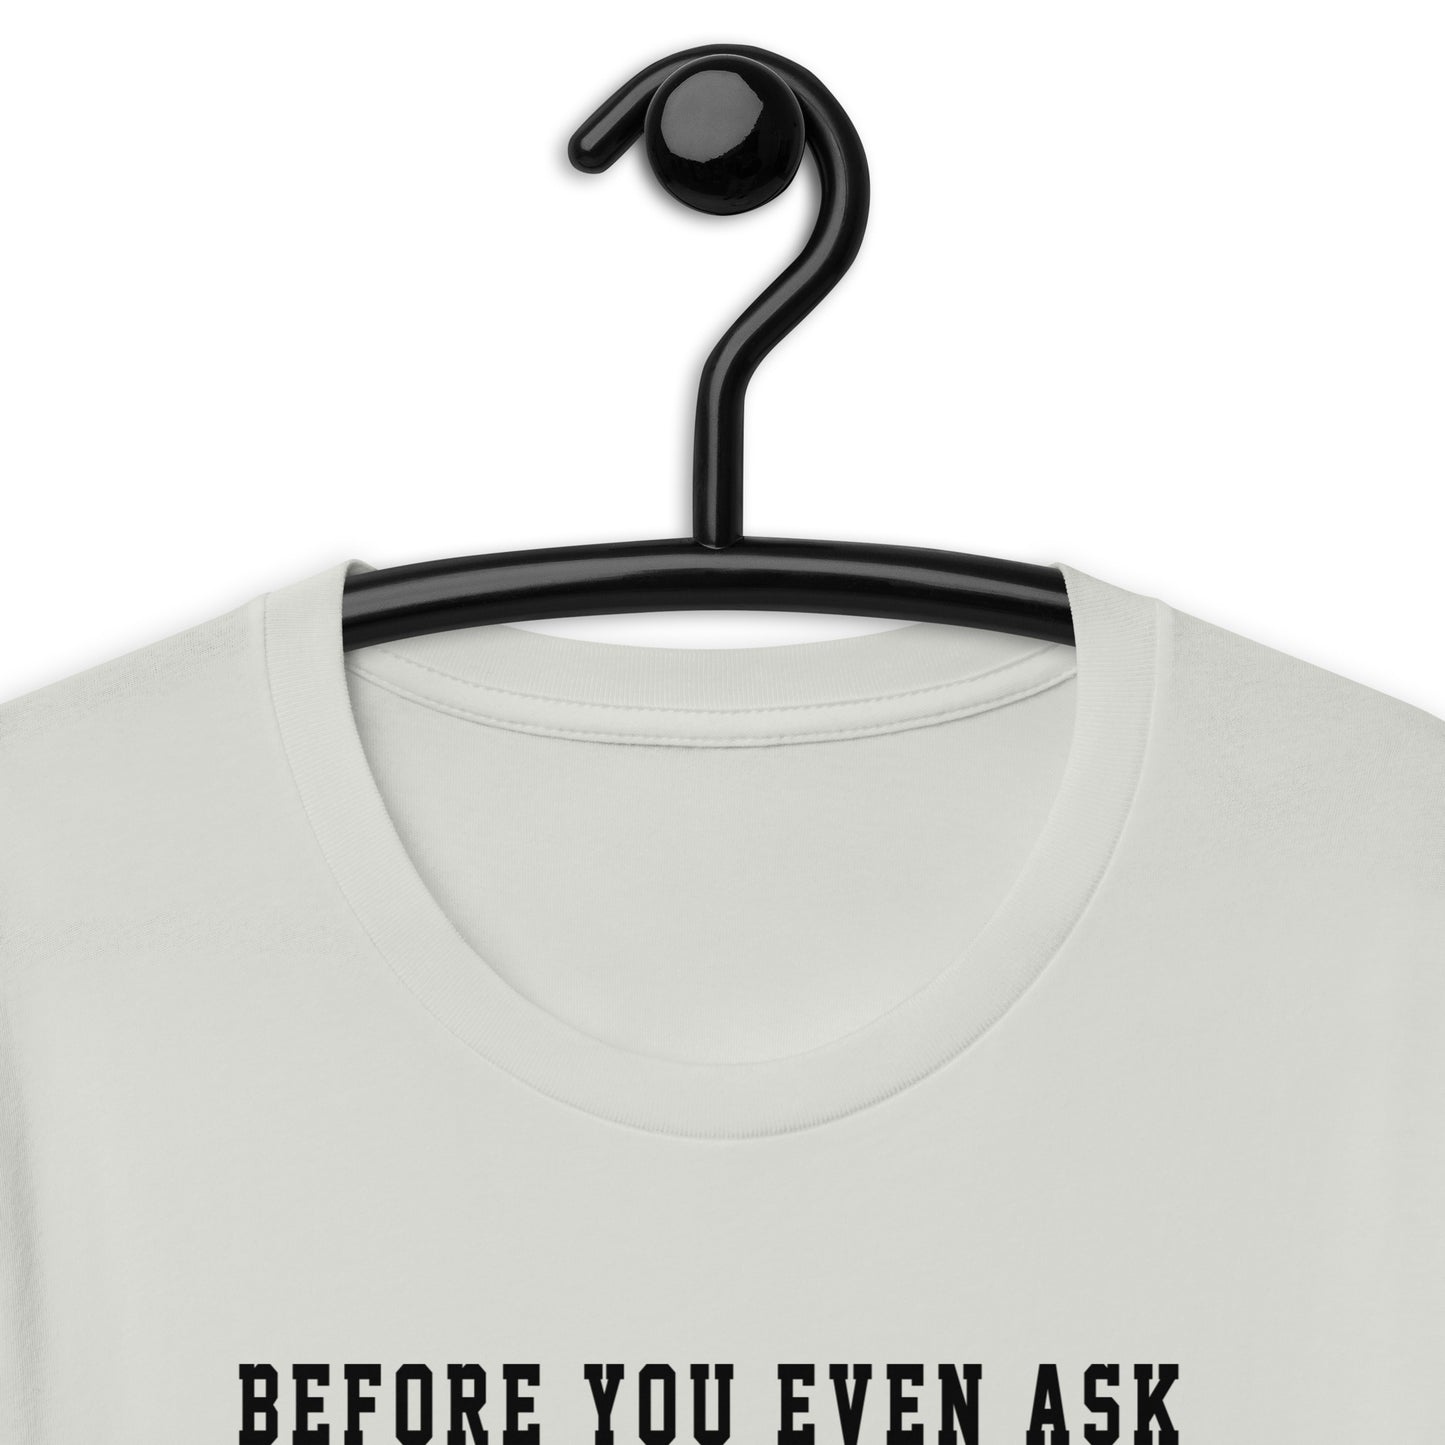 Before you ask Fans Short-Sleeve Unisex T-Shirt